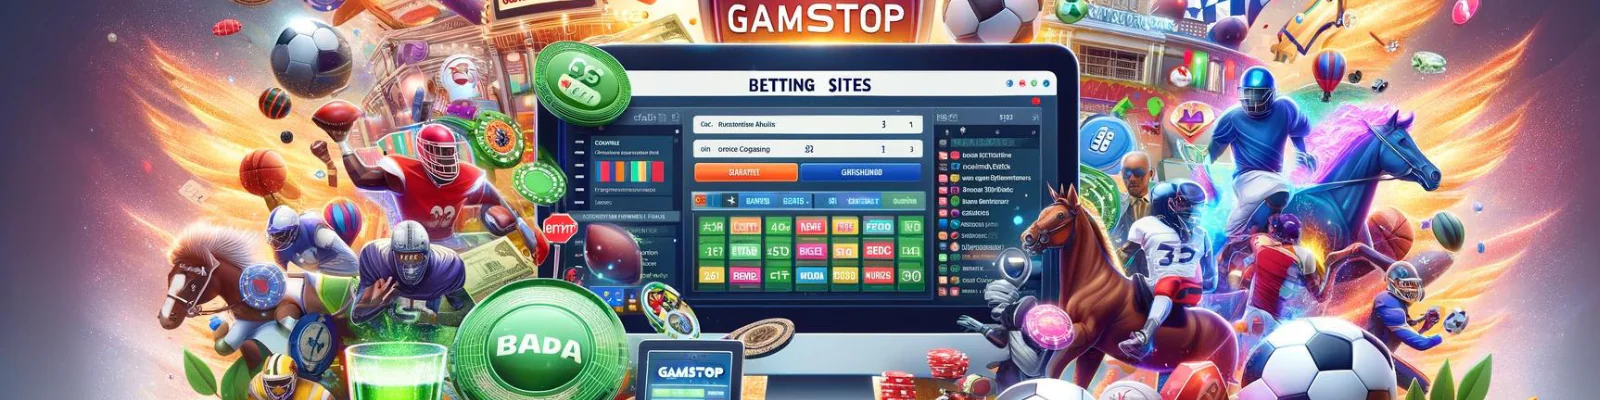 Non GamStop Betting Sites Reviews